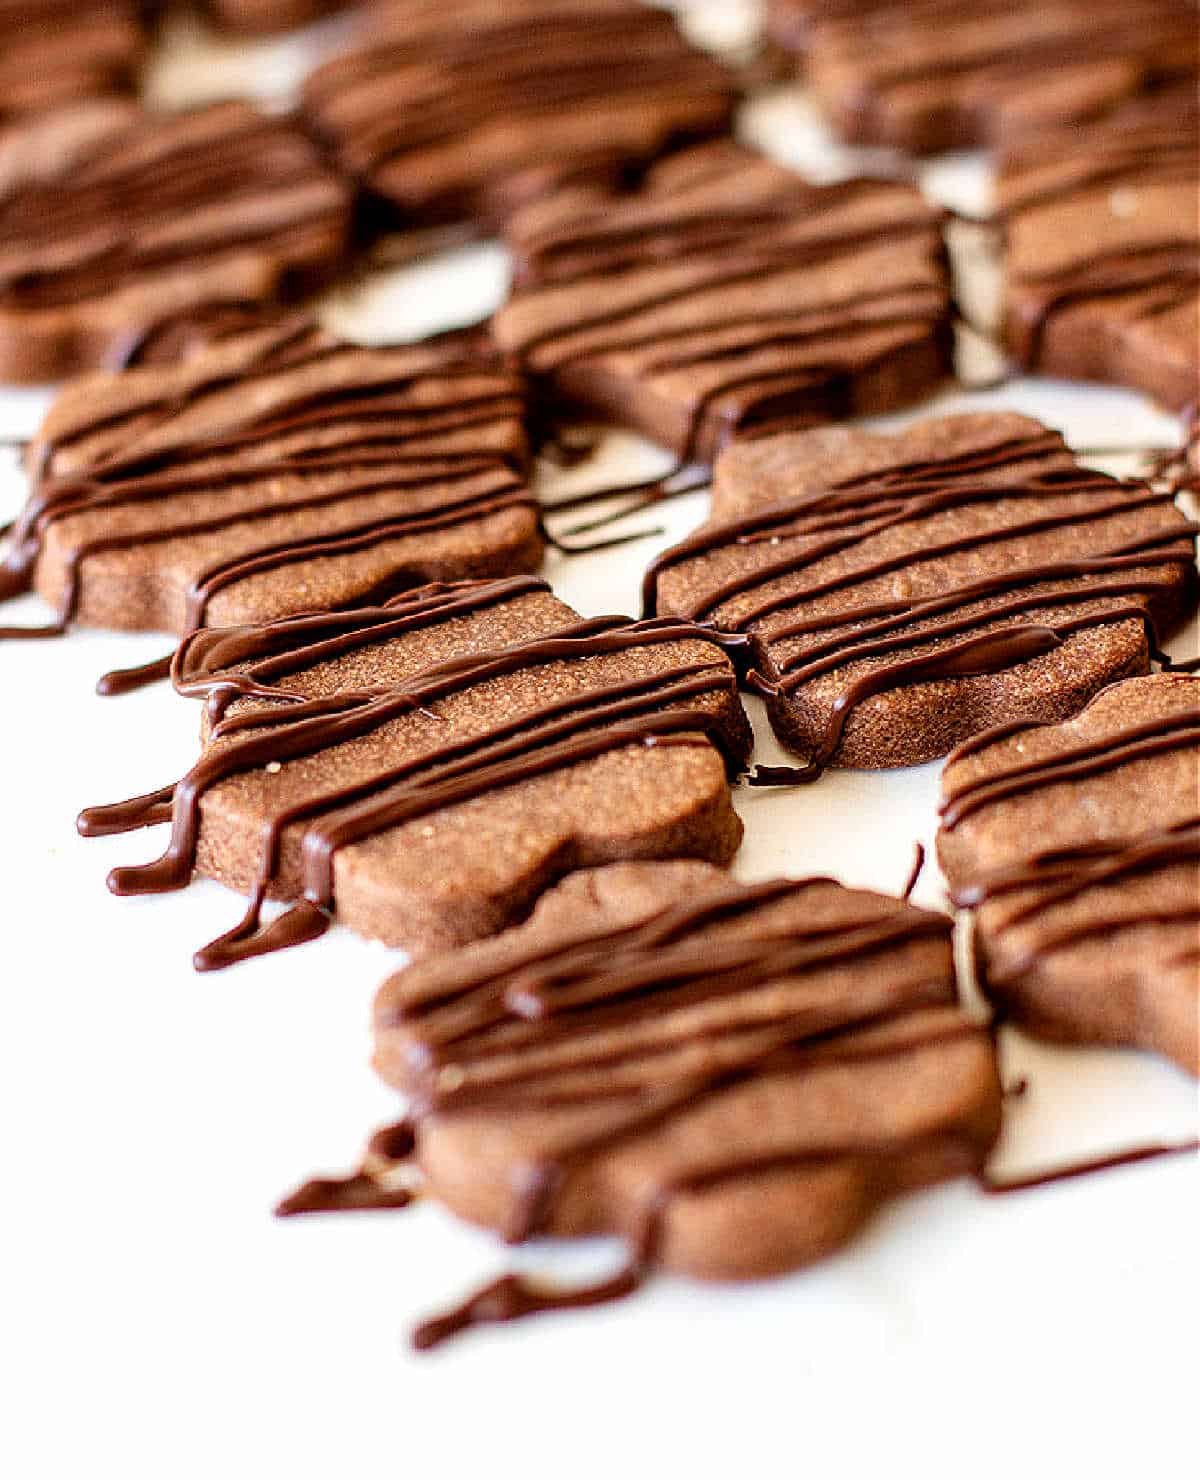 Rows of flower-shaped chocolate cookies topped with chocolate threads on a white surface.